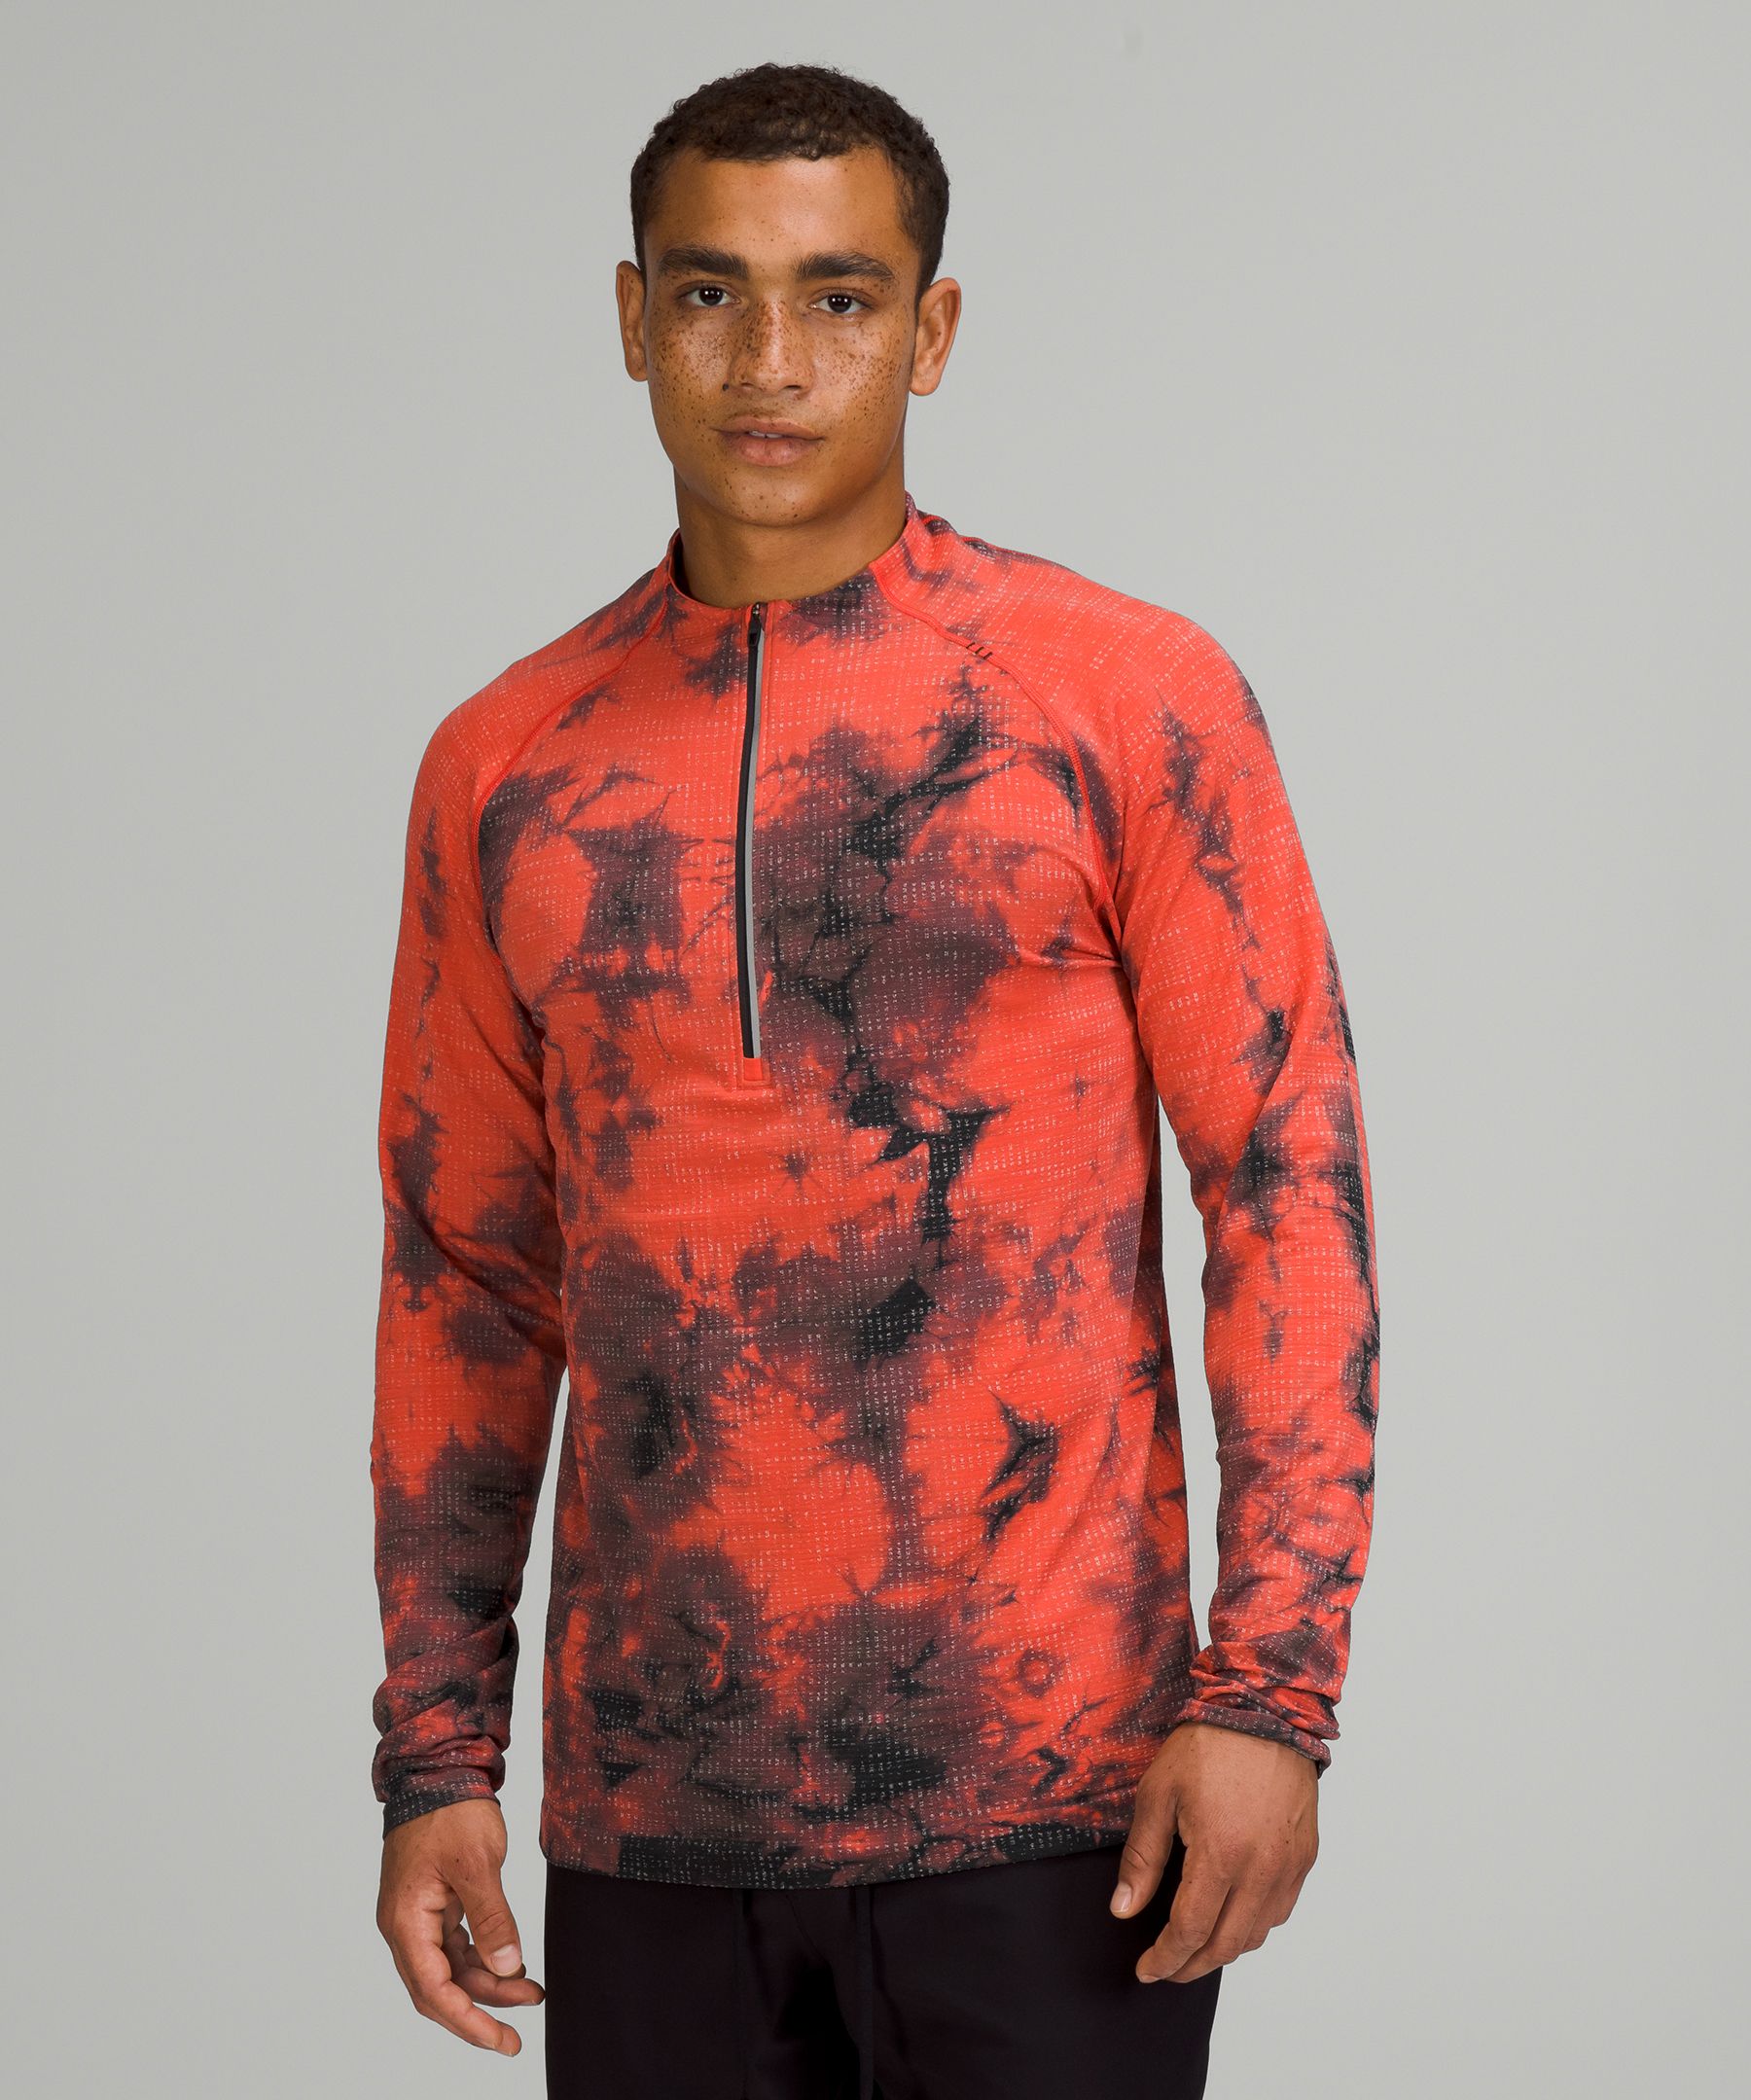 Disconnect Marble Dye Autumn Red/Graphite Grey